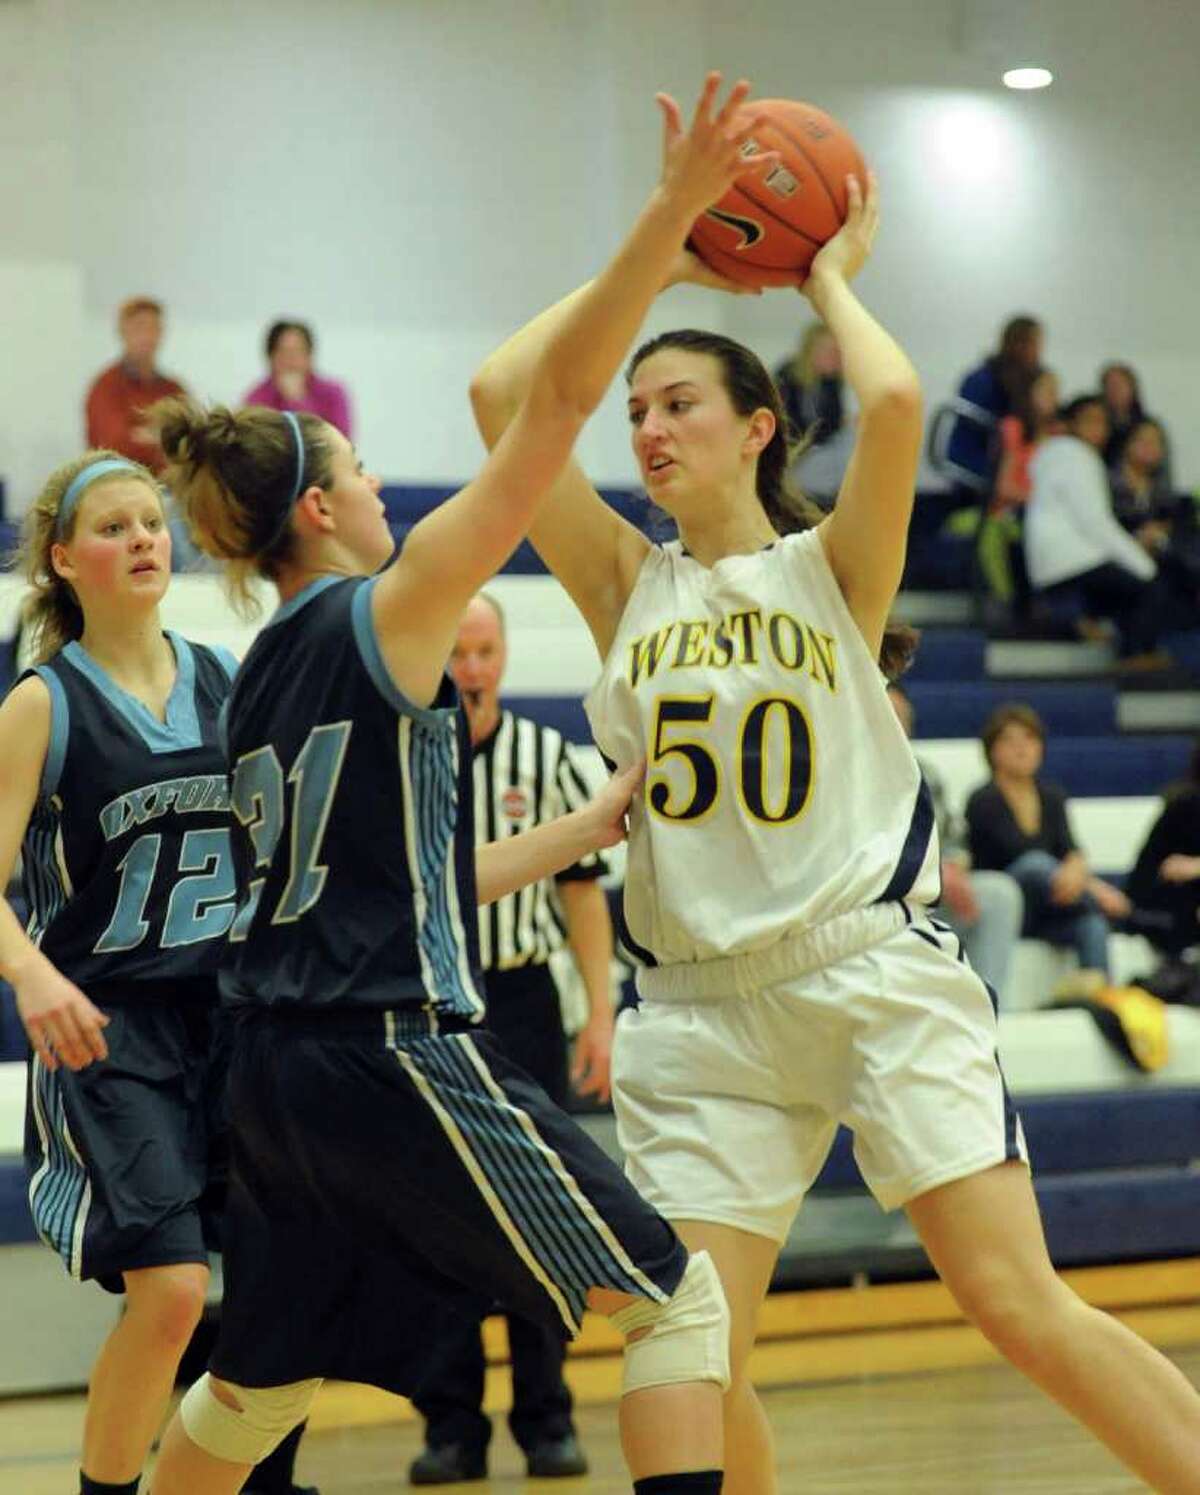 Weston girls basketball action against Oxford at Weston High School in Weston, Conn. on Friday January 14, 2011. Weston's #50 Anna Mahoney looks to pass over Oxford's #31 Rhiannon Bacik.